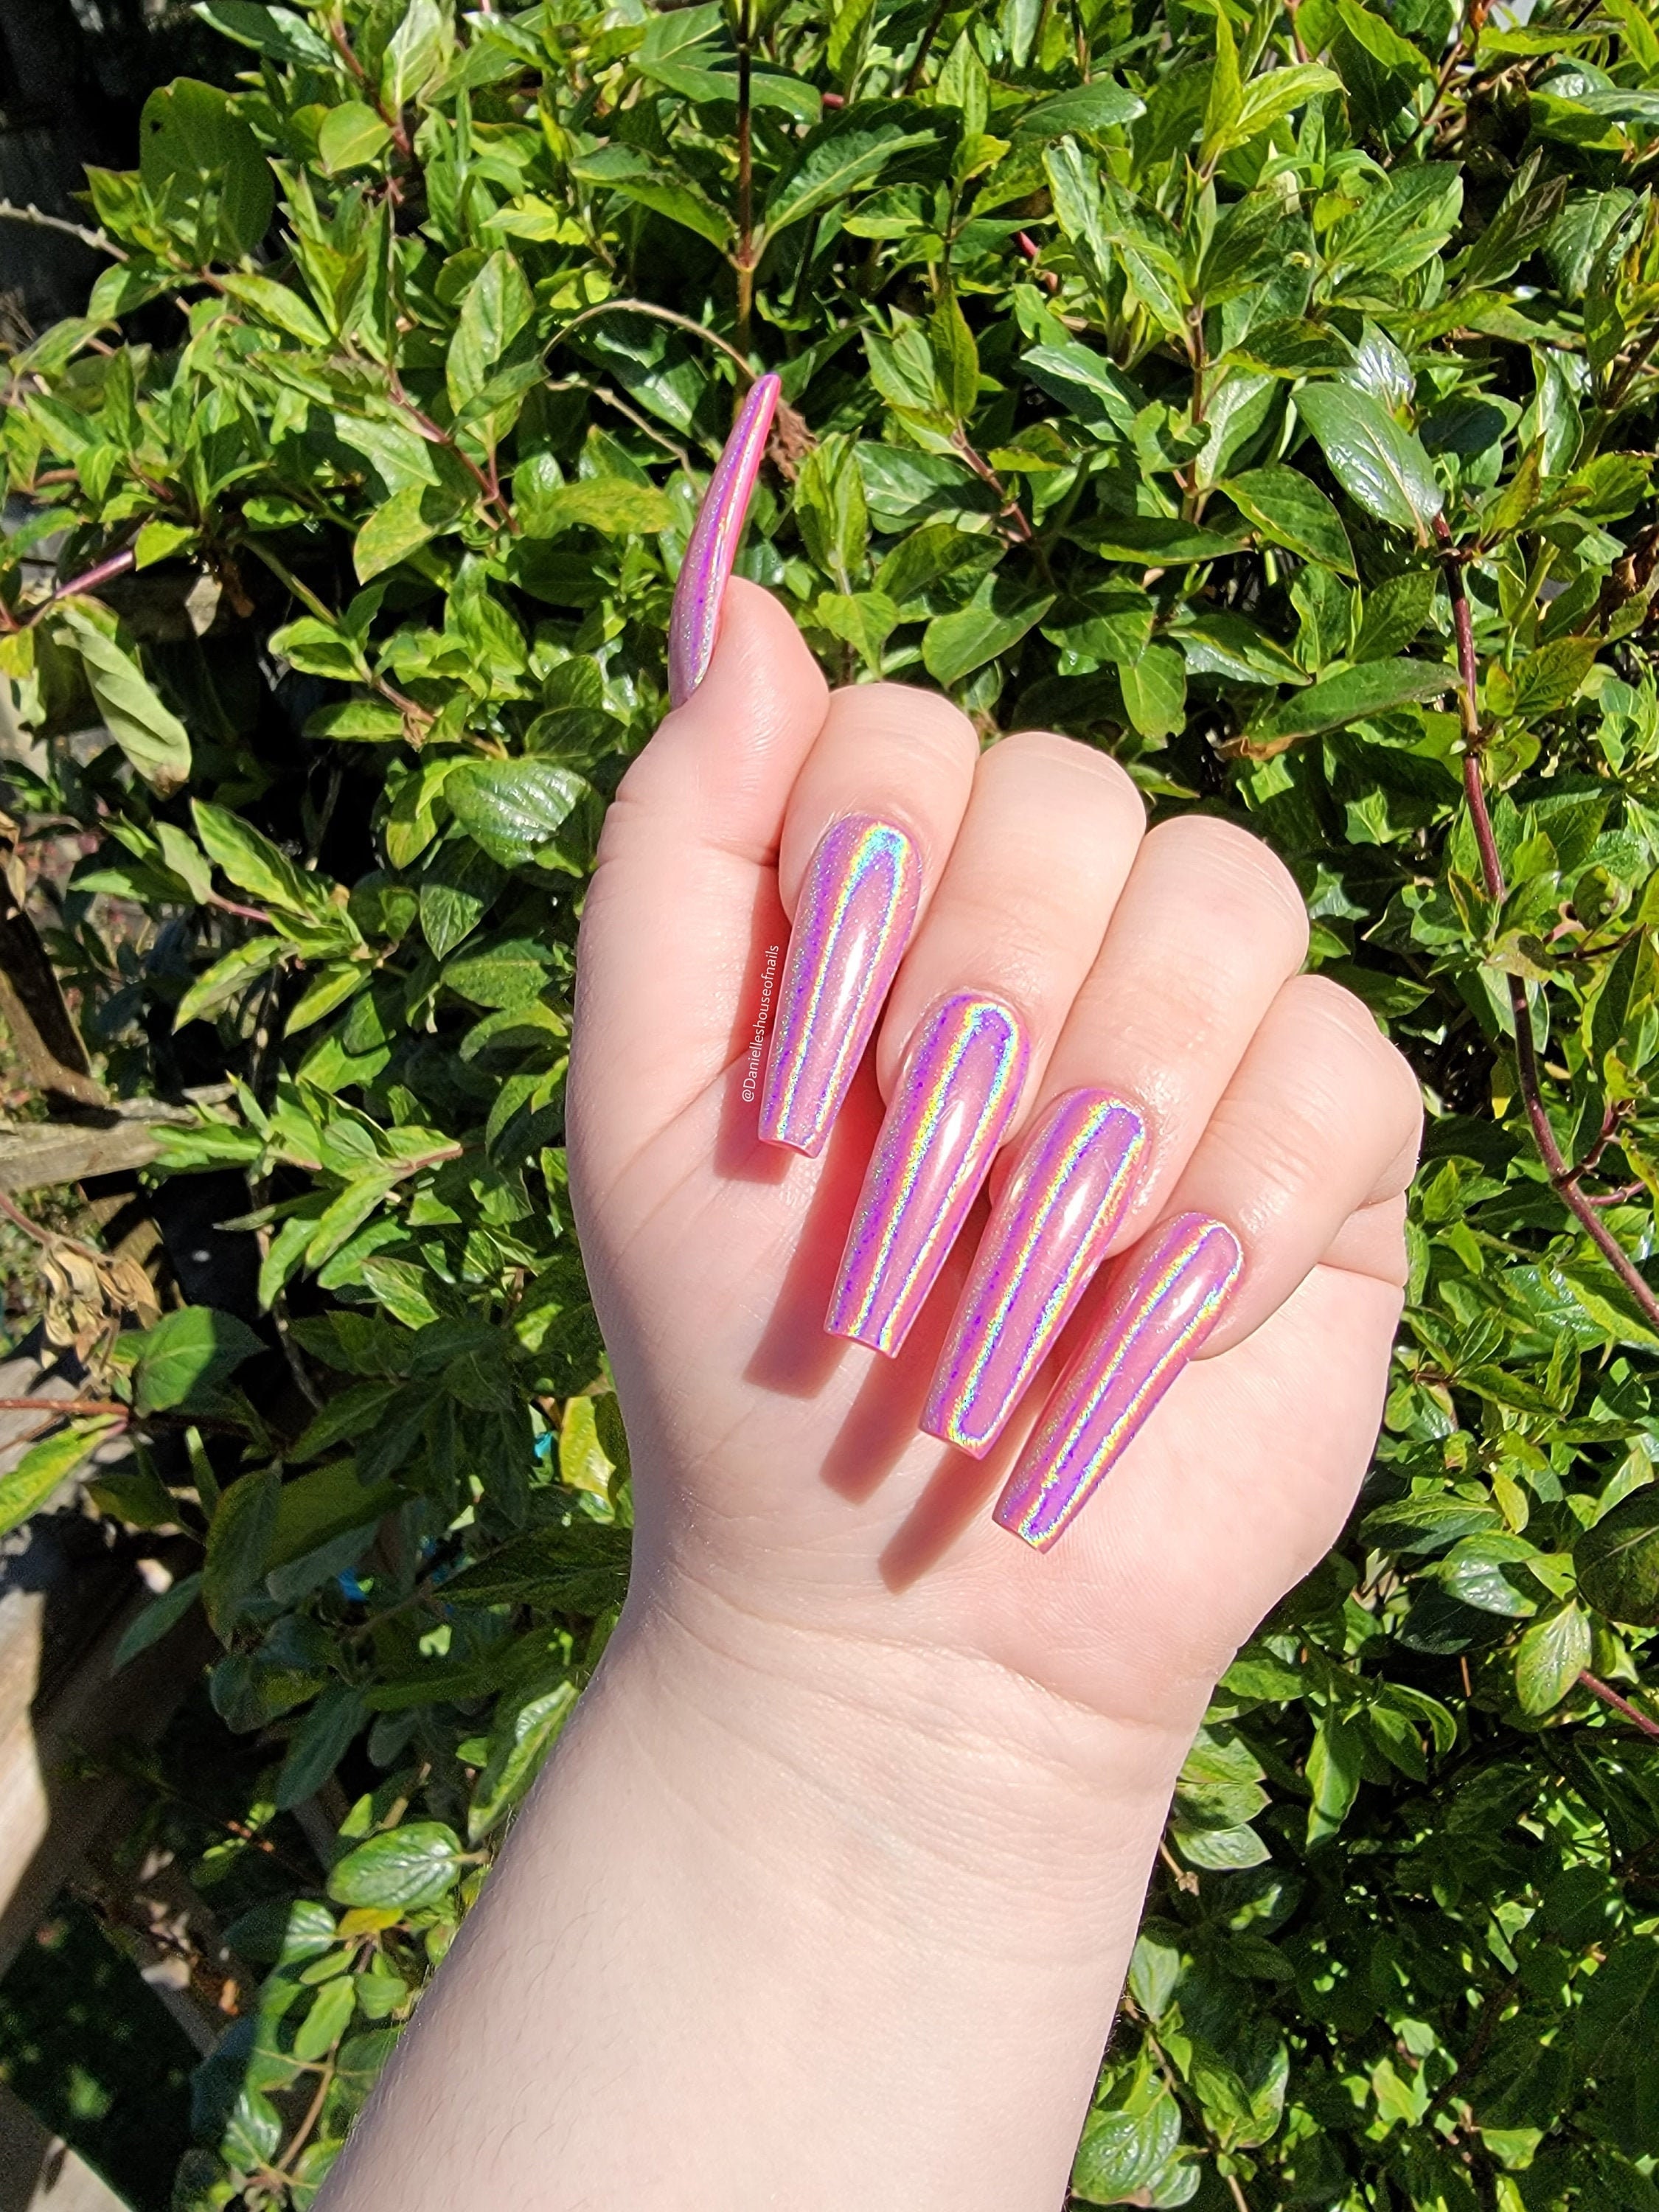 Pink Holographic Nails Luxury Press On Nails Press On Nails Glue On Nails Gel Nails Coffin Nails